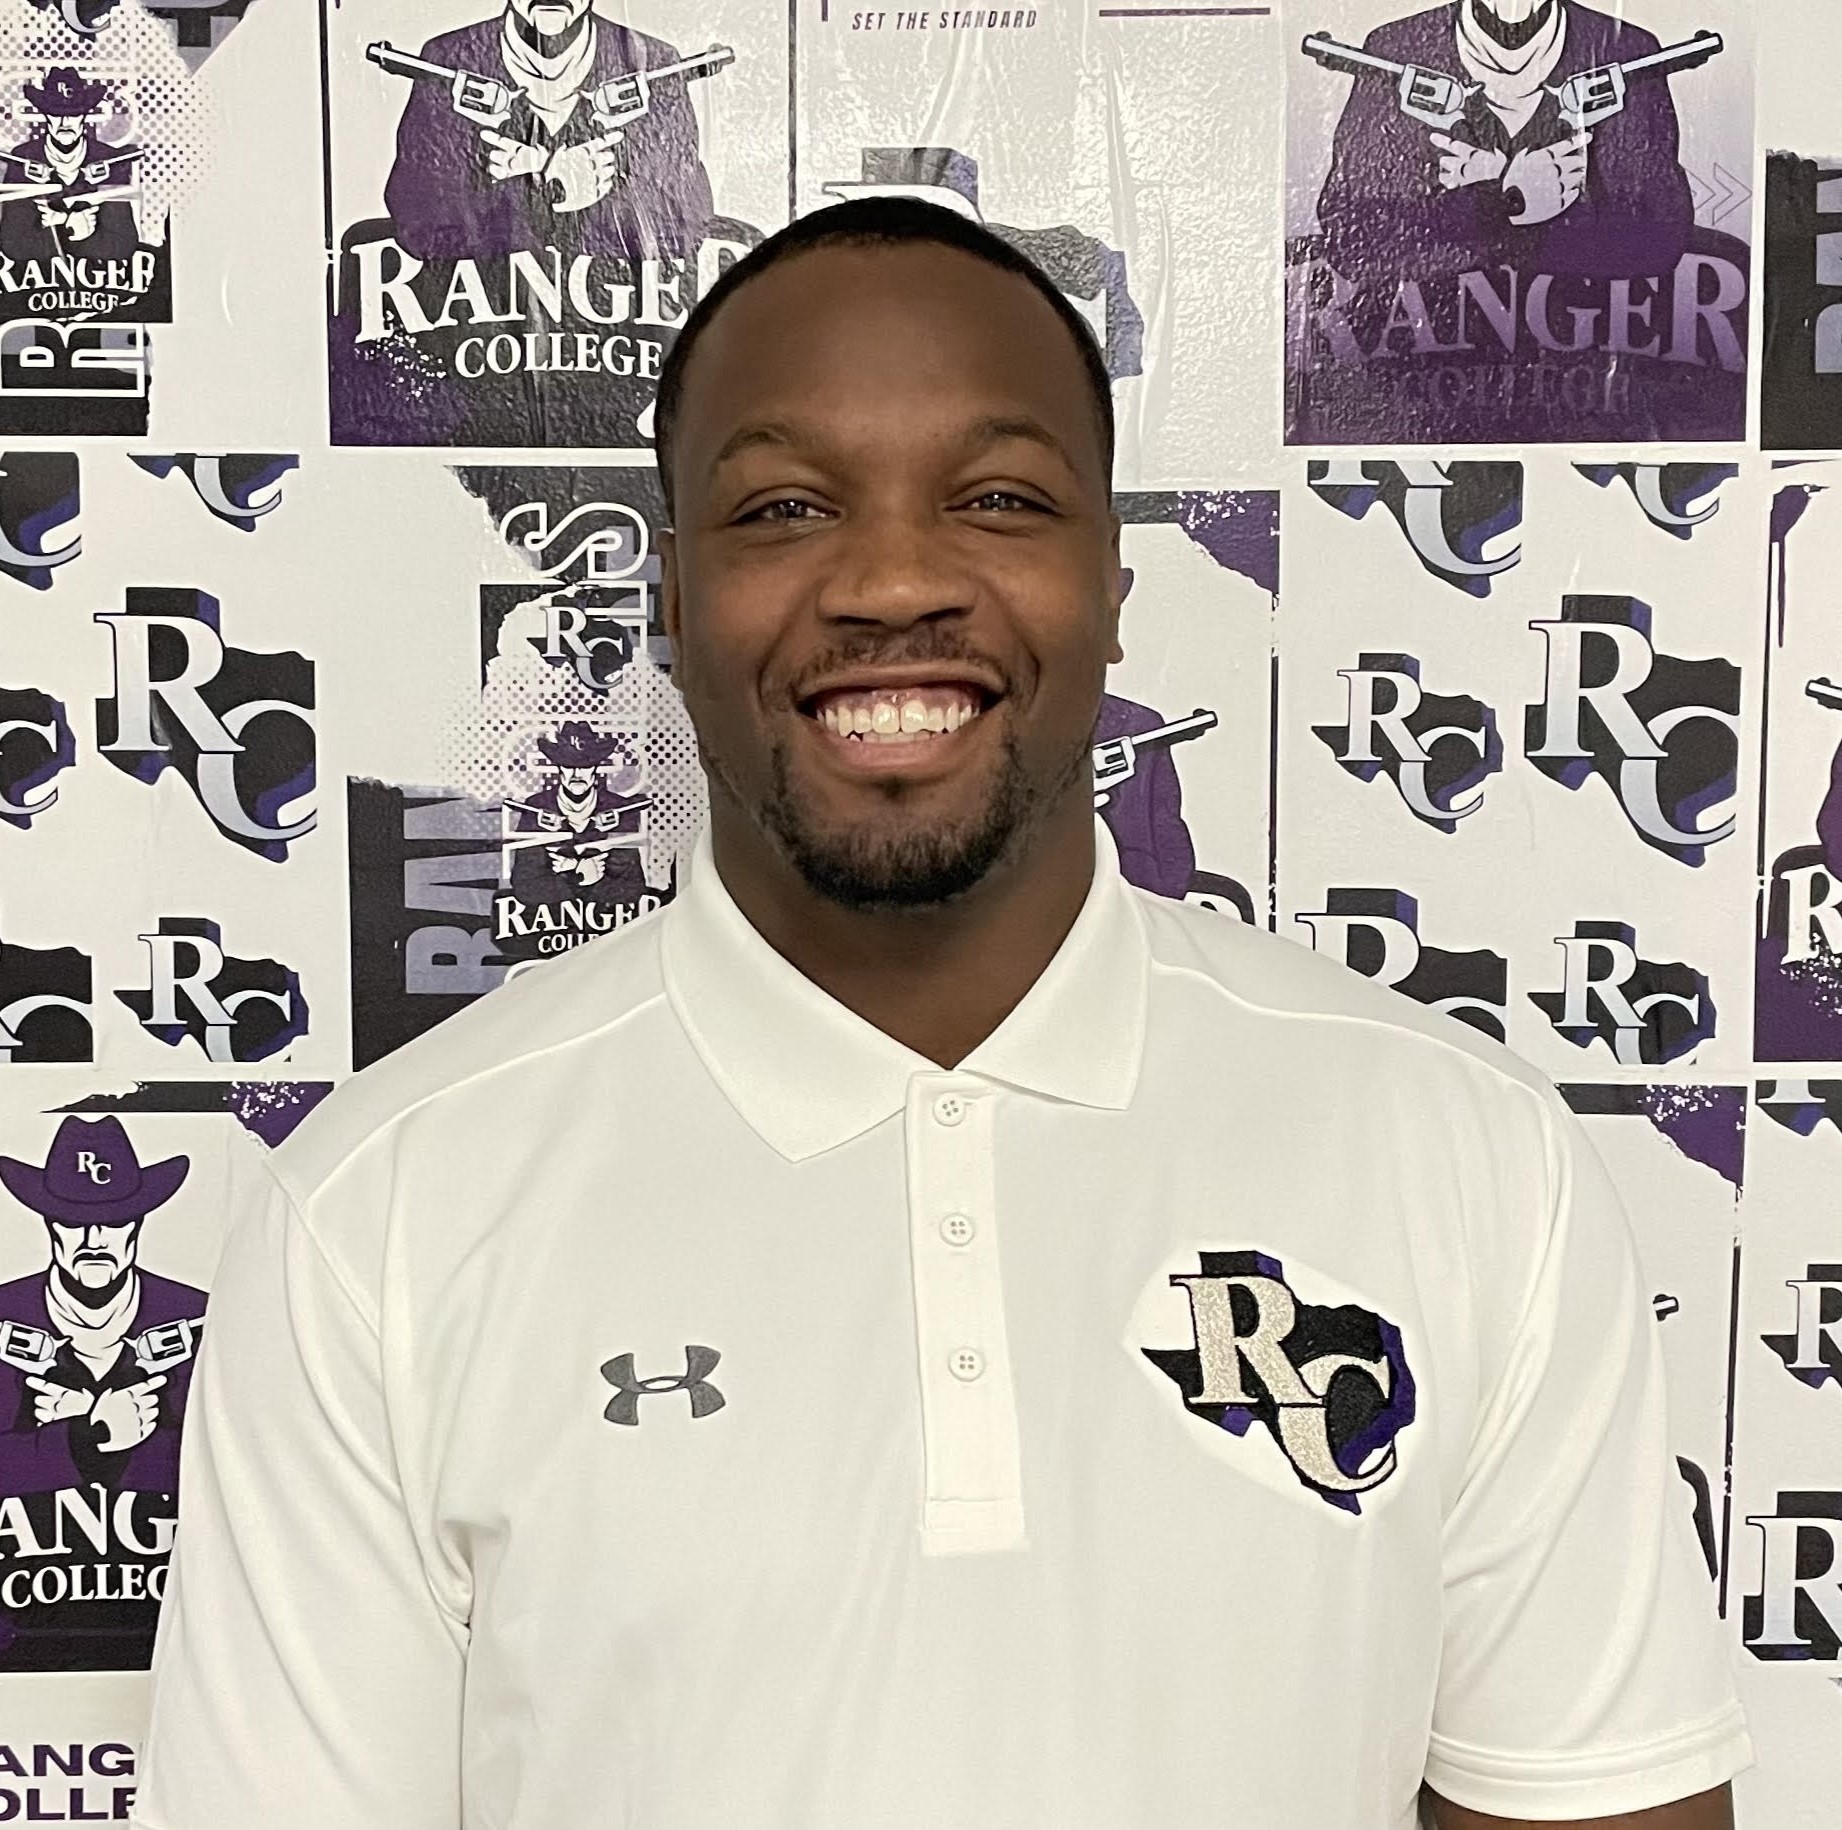 De’Torrian Green has been named the new Head Track and Cross-Country Coach for Ranger College.